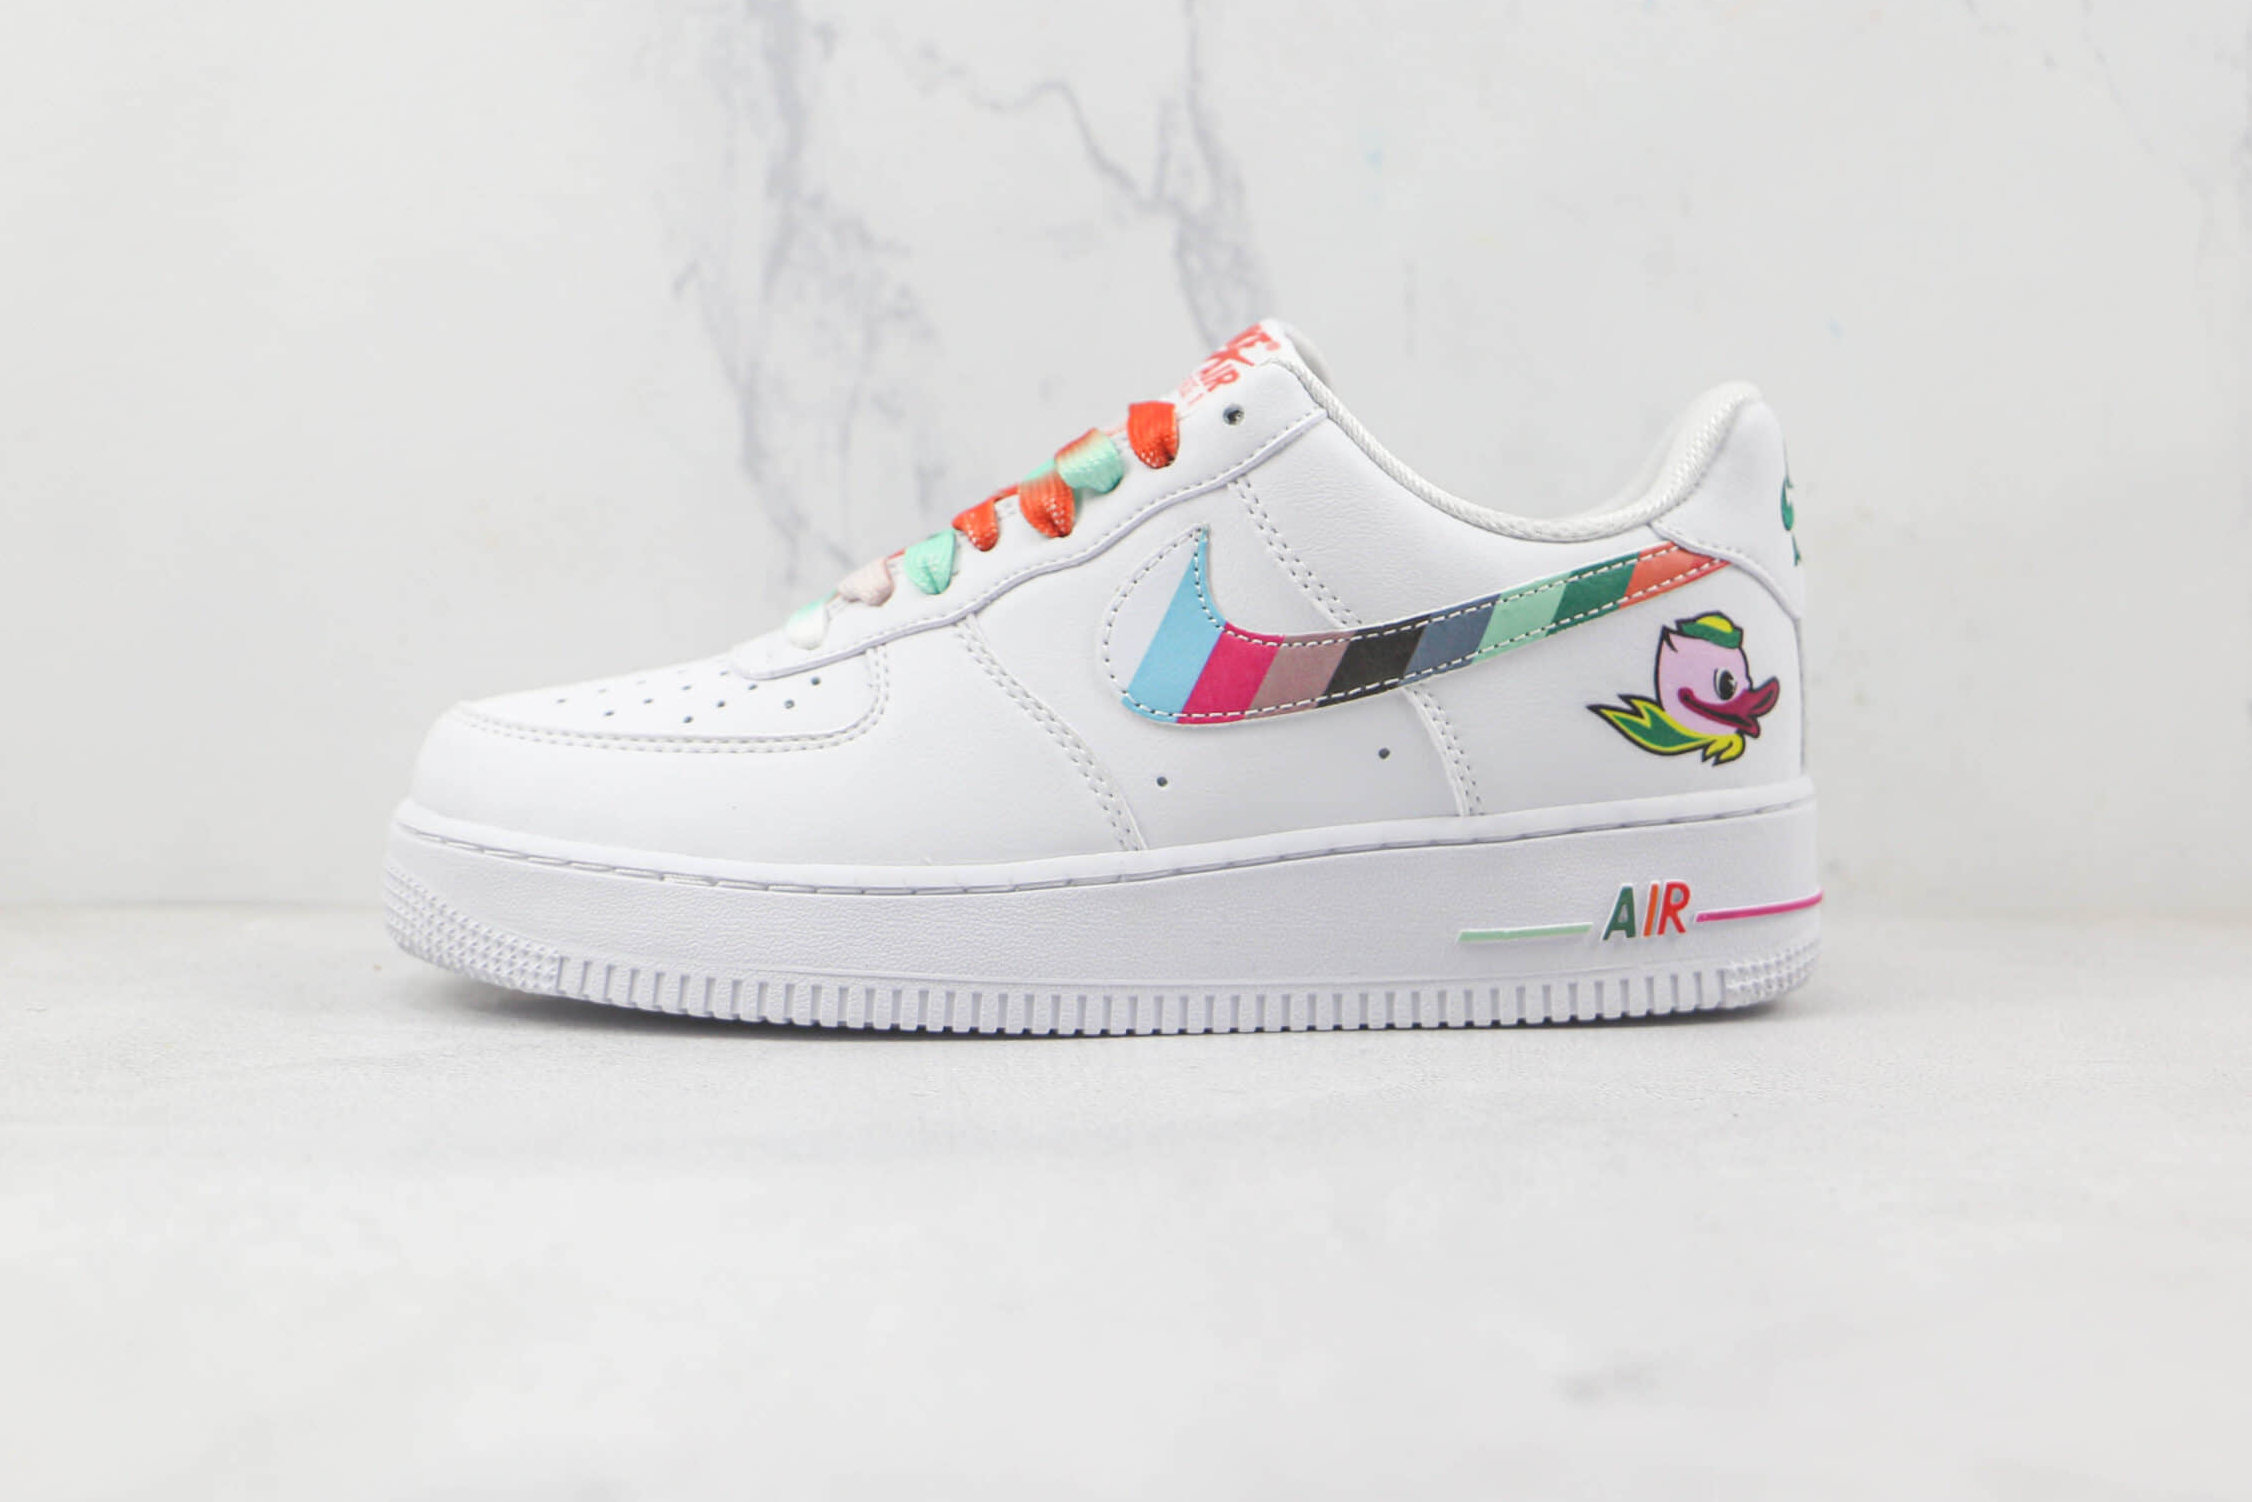 Nike Air Force 1 07 Low White Green Orange Multi-Color DH9595-100 - Shop Stylish Shoes Online